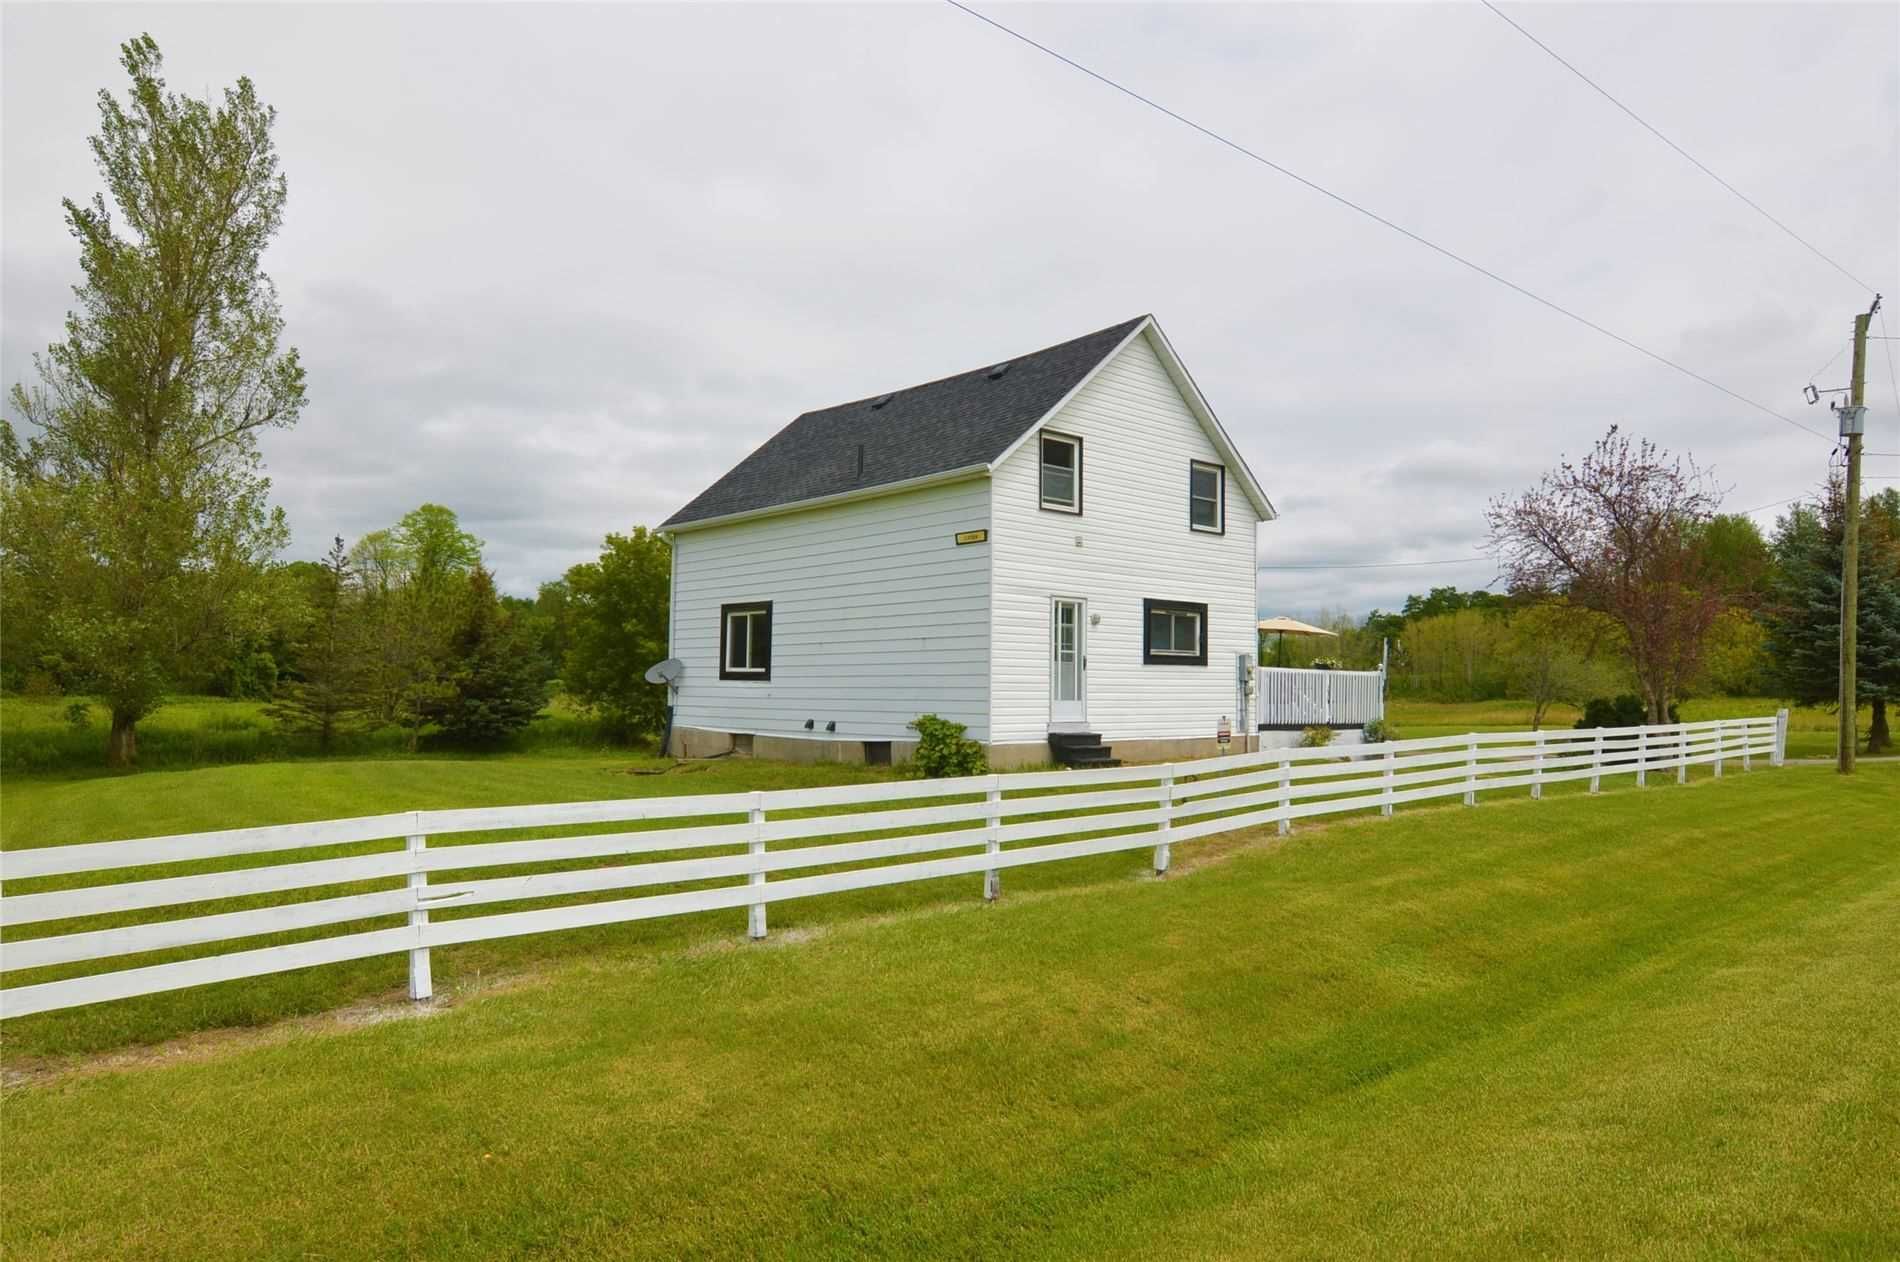 Main Photo: 13984 County 29 Road in Trent Hills: Warkworth House (2-Storey) for sale : MLS®# X5304146